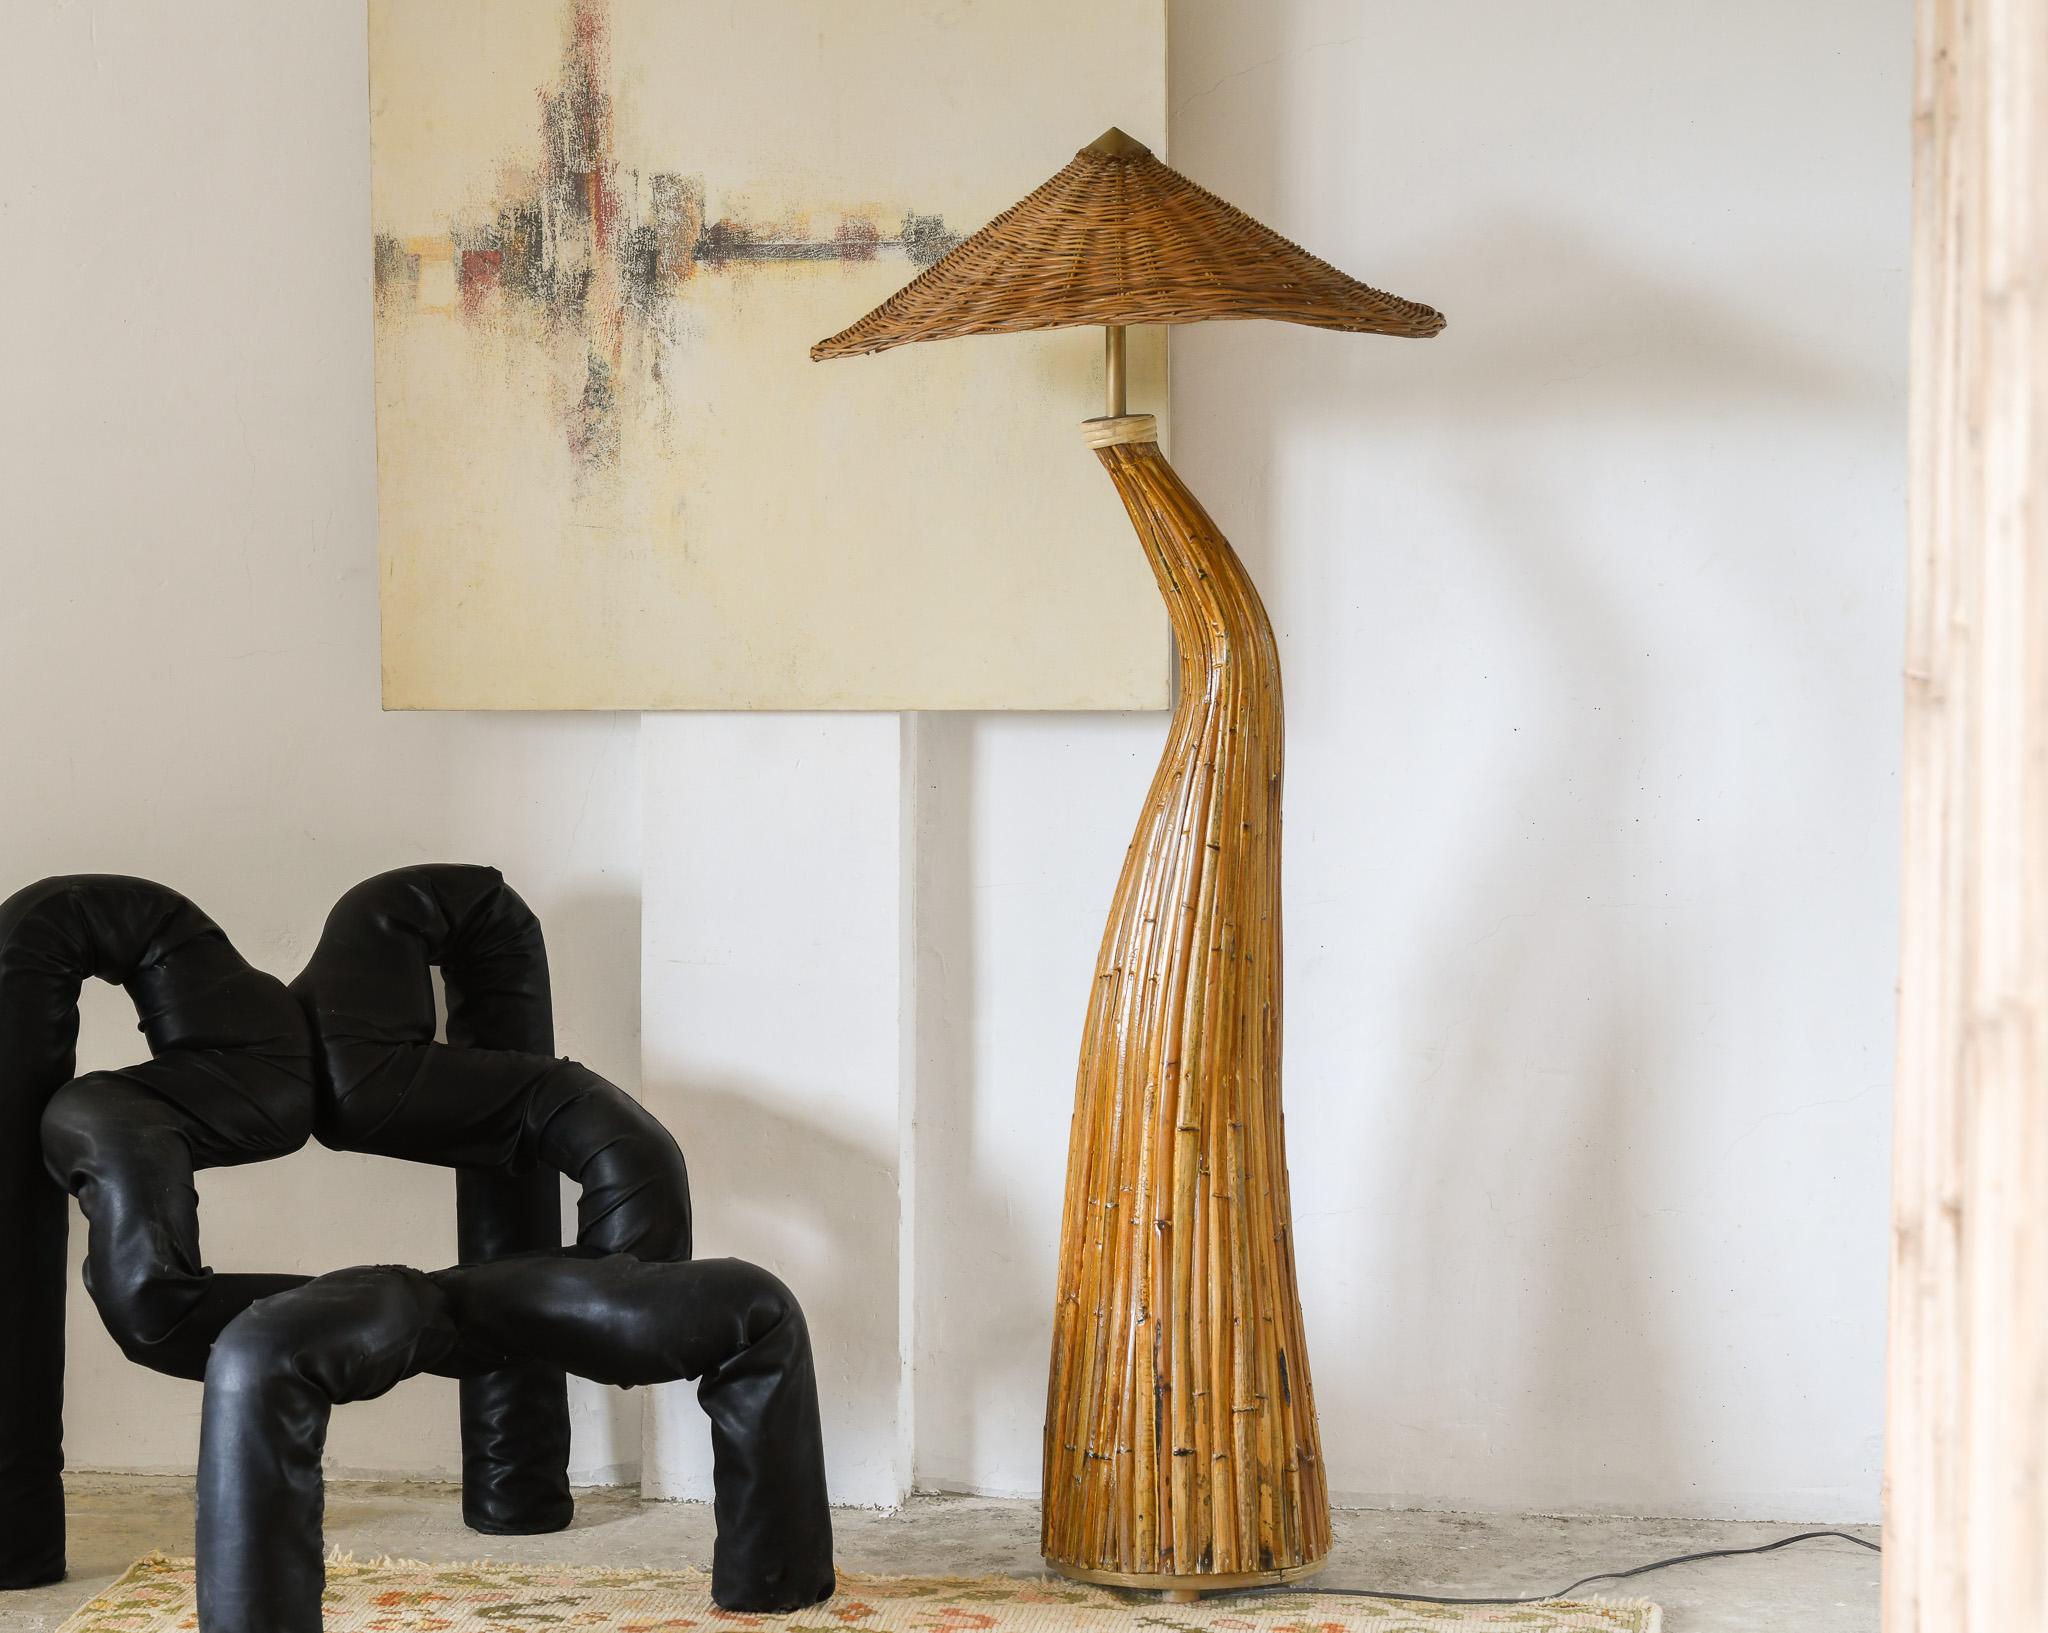 This stunning rattan floor lamp is an exquisite mid-century modern piece, expertly crafted with an organic shroom shape and a lacquered finish. From the woven cane shade to its awe-inspiring curves, this is the perfect piece for any large living